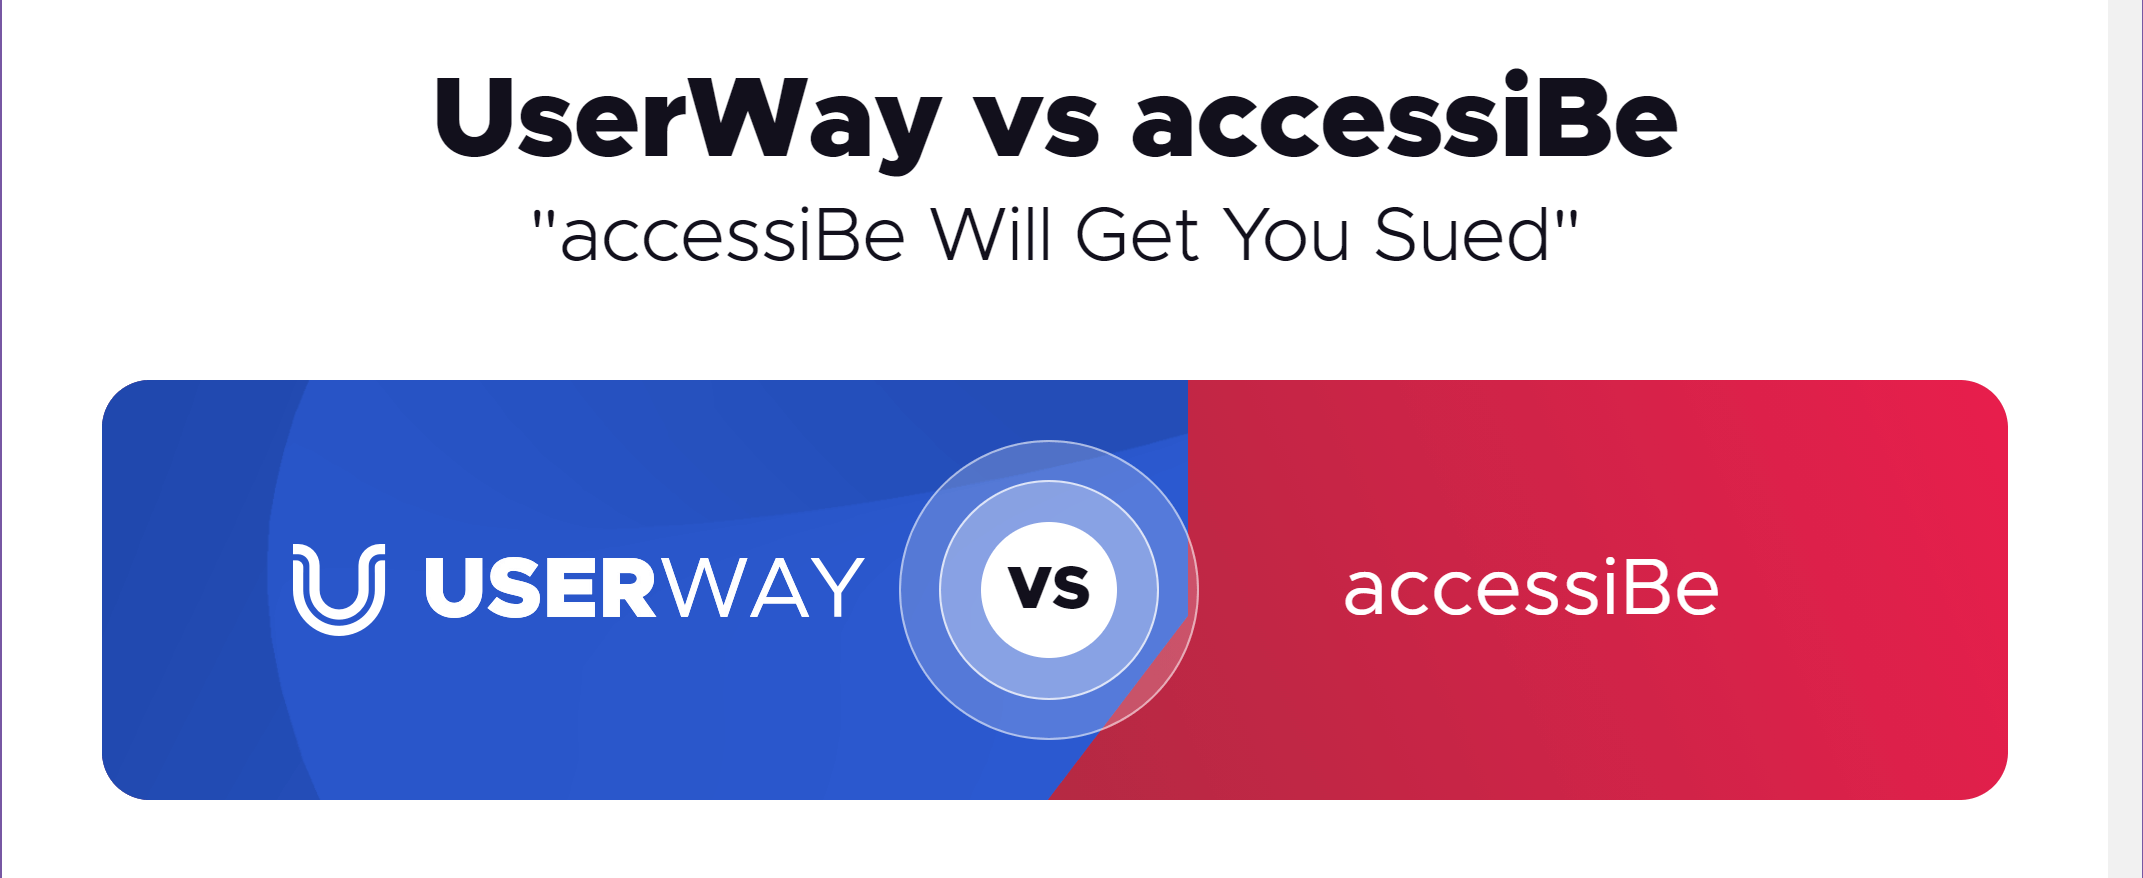 Screen shot from UserWay site with a header of UserWay versus accessiBe, and the text “accessiBe Will Get You Sued”.